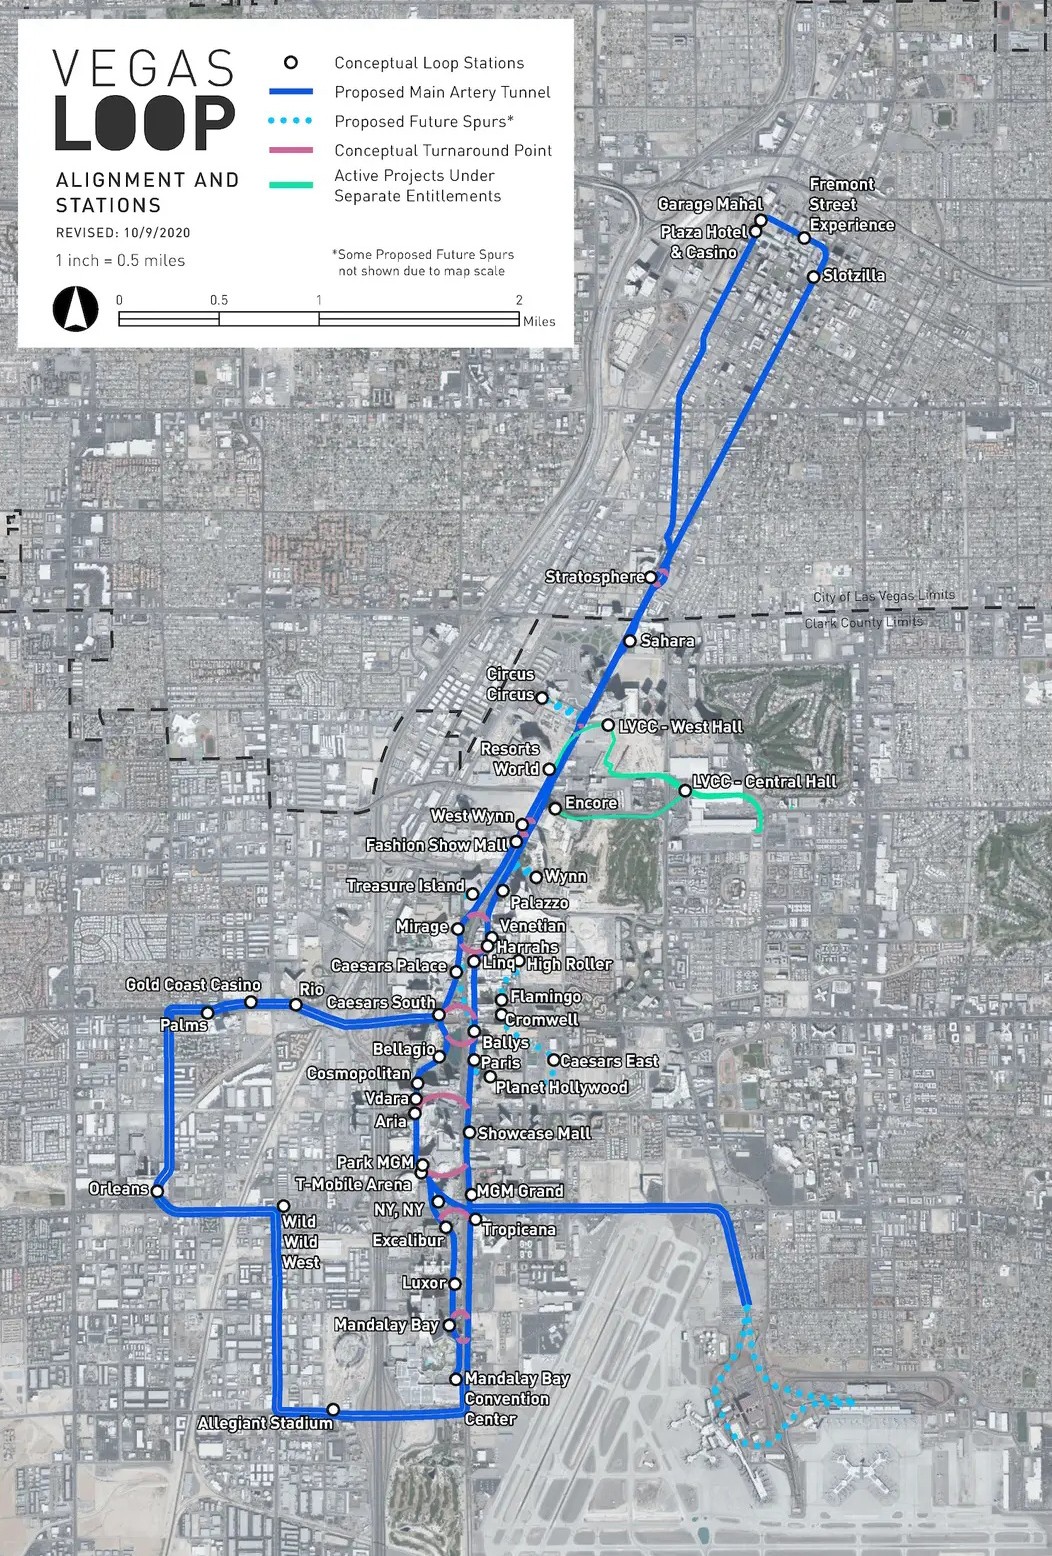 Vegas Loop, connection between Allegiant Stadium and other parts of the city